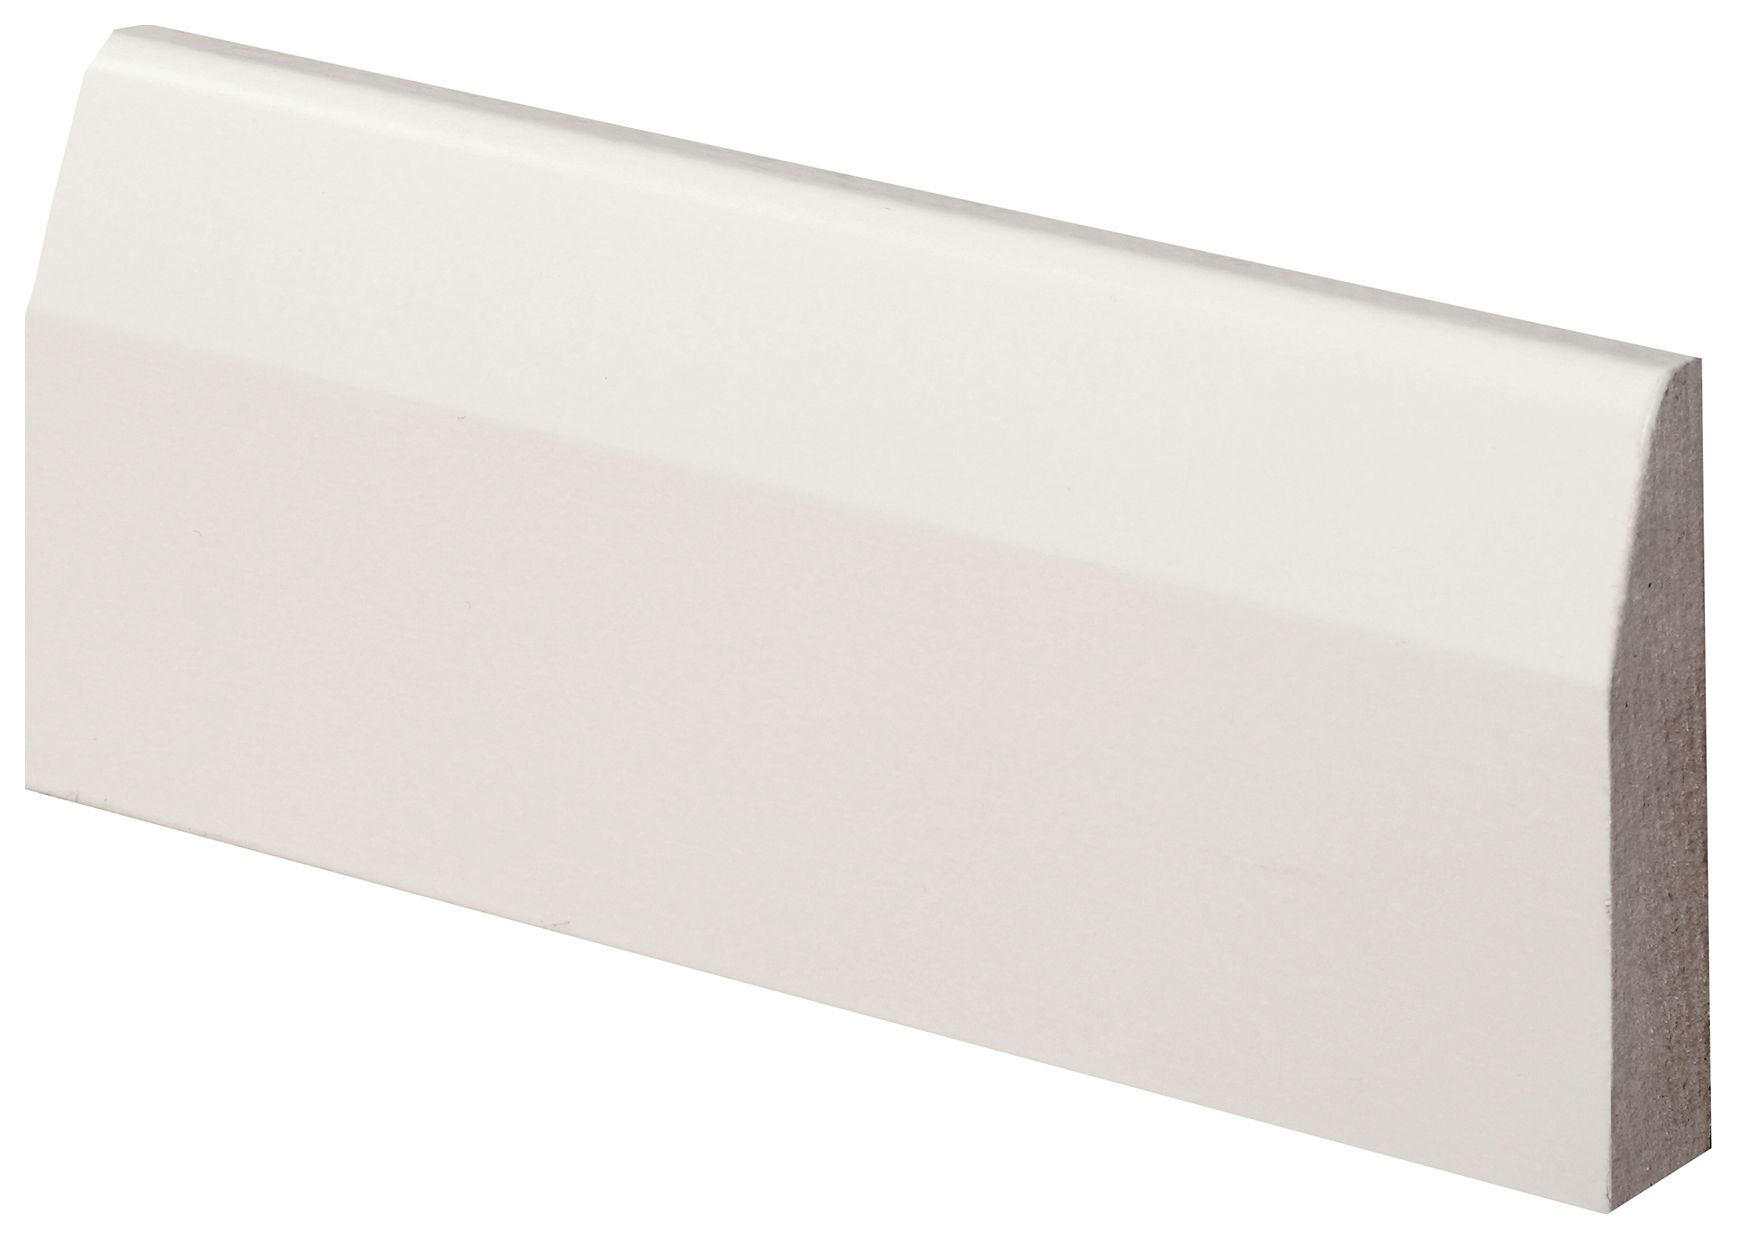 Image of Wickes Chamfered Fully Finished Architrave - 18 x 69 x 2100mm Pack of 5